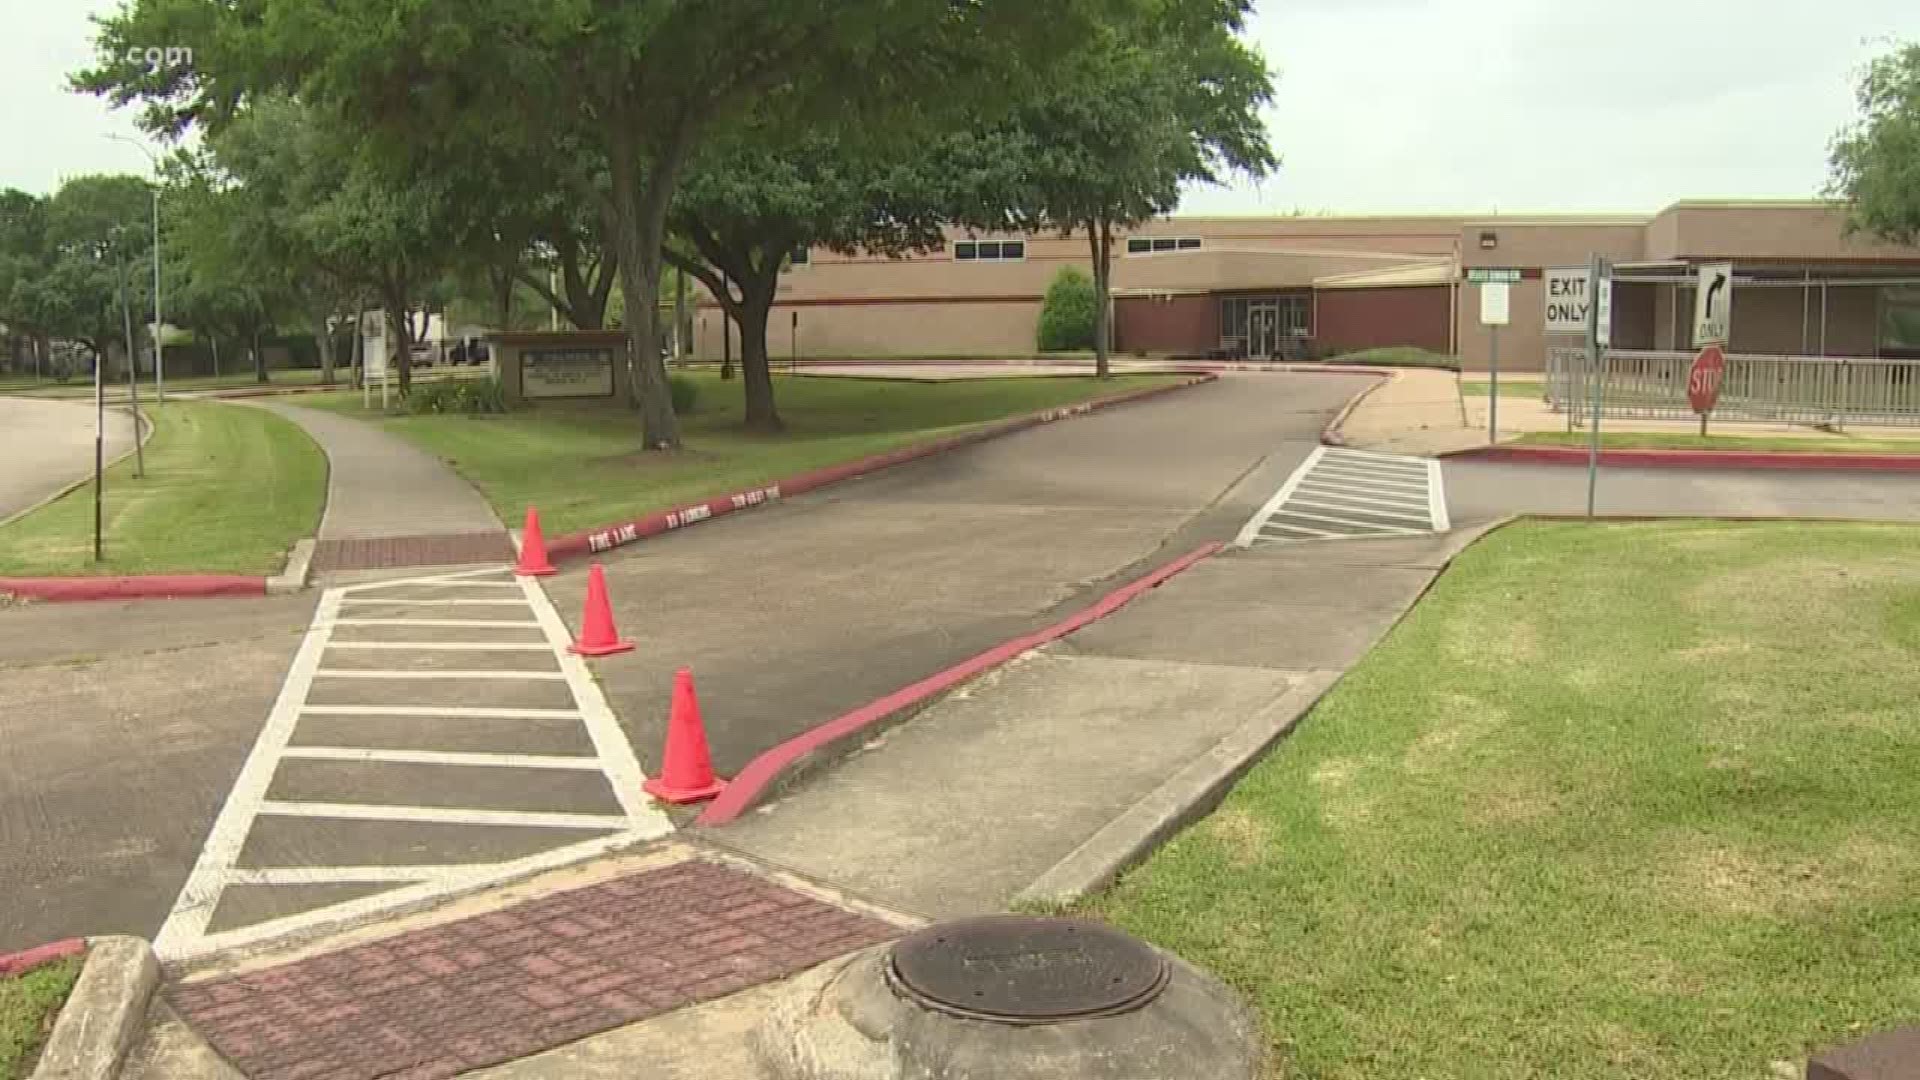 Texas Gov. Greg Abbott announced Friday all public and private schools will remain close for the rest of the school year. Jason Miles reports.